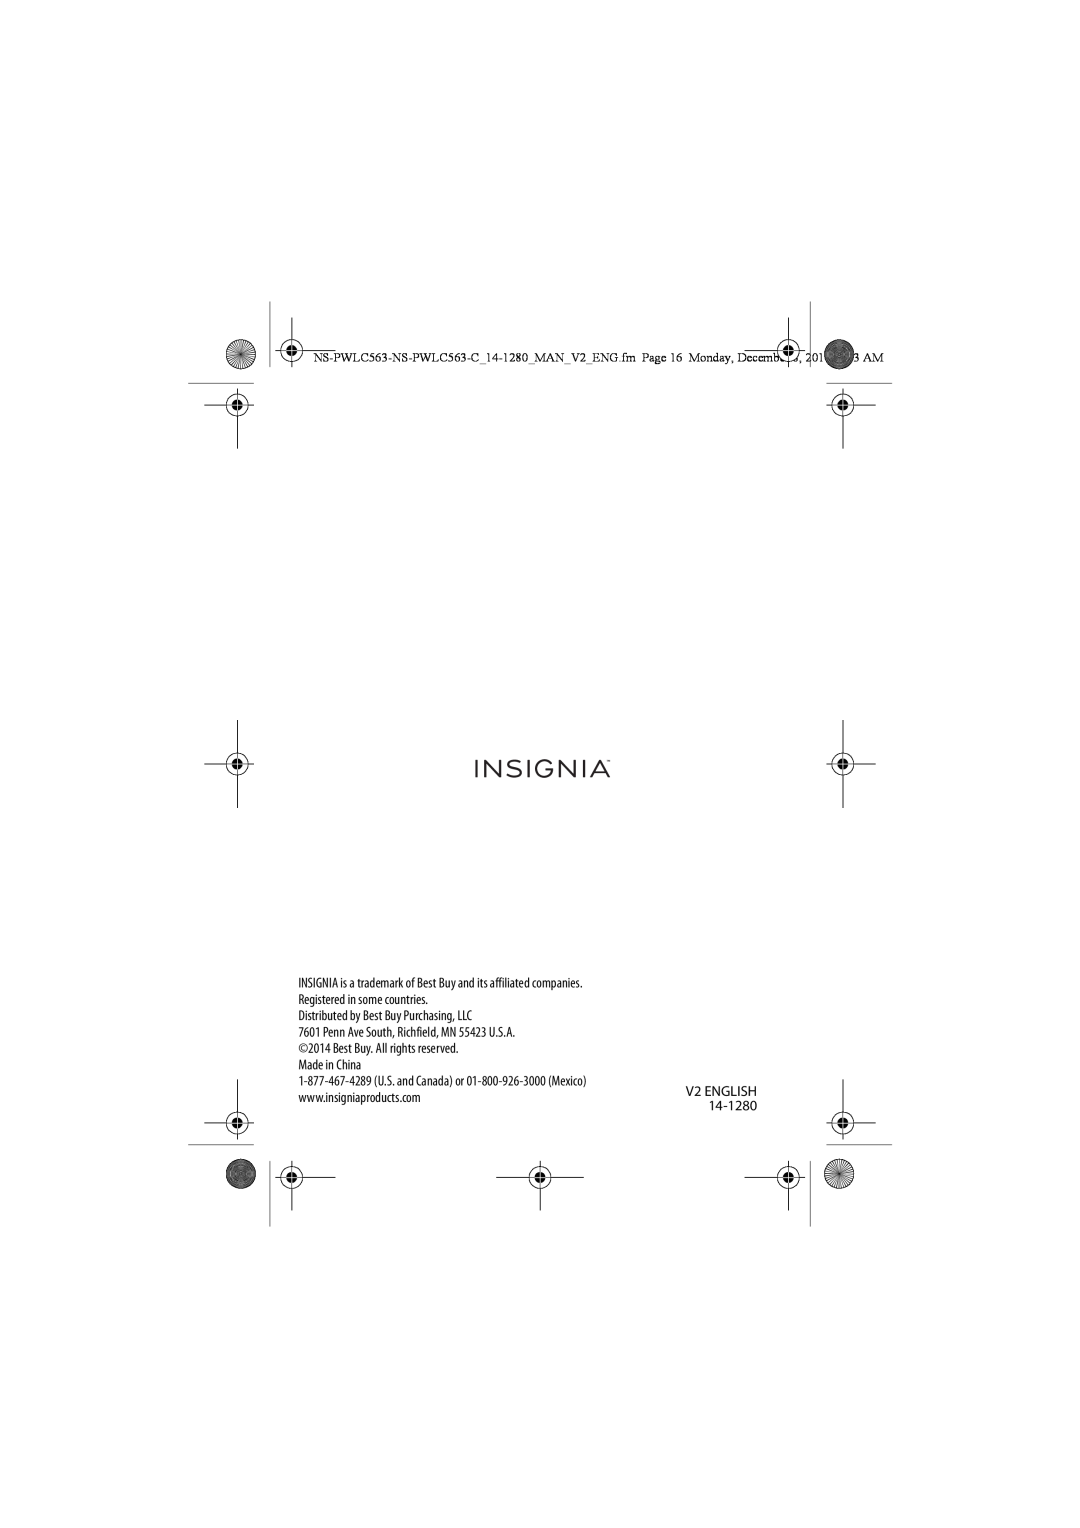 Insignia NS-PWLC563-C manual Distributed by Best Buy Purchasing, LLC, Made in China, V2 ENGLISH 14-1280 